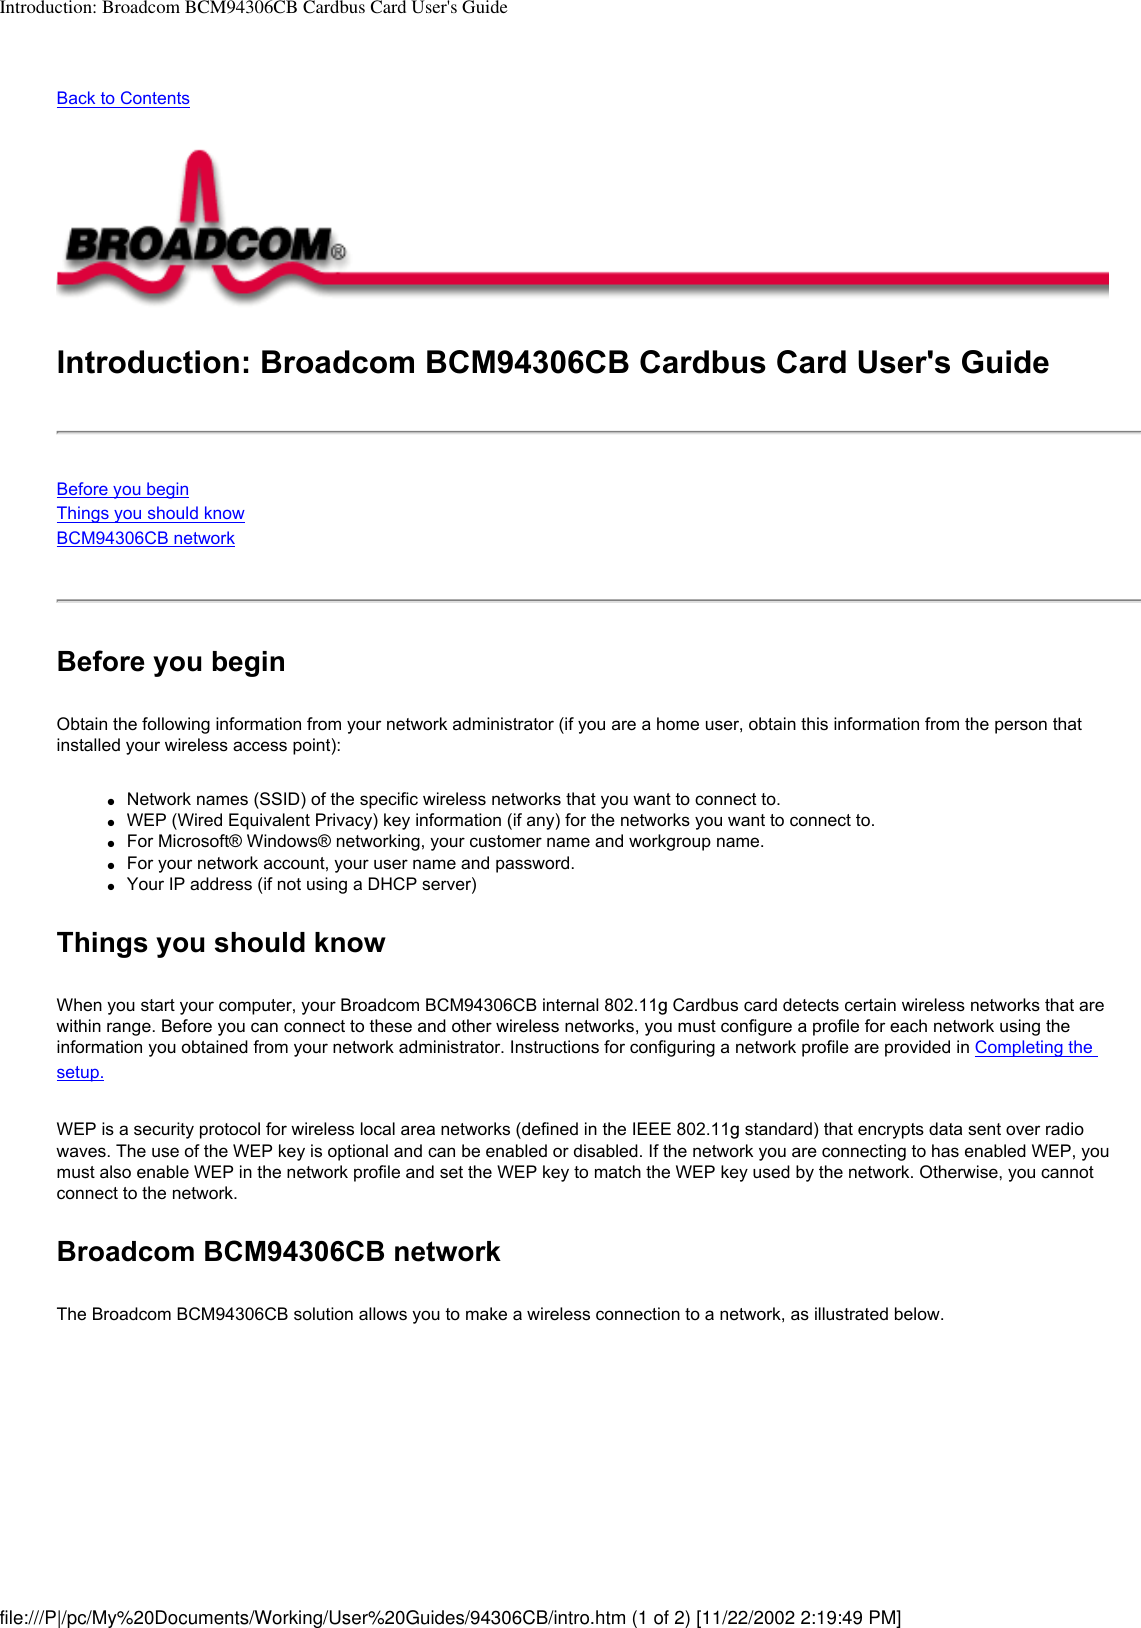 Introduction: Broadcom BCM94306CB Cardbus Card User&apos;s GuideBack to ContentsIntroduction: Broadcom BCM94306CB Cardbus Card User&apos;s GuideBefore you beginThings you should knowBCM94306CB network Before you beginObtain the following information from your network administrator (if you are a home user, obtain this information from the person that installed your wireless access point):●     Network names (SSID) of the specific wireless networks that you want to connect to.●     WEP (Wired Equivalent Privacy) key information (if any) for the networks you want to connect to.●     For Microsoft® Windows® networking, your customer name and workgroup name.●     For your network account, your user name and password.●     Your IP address (if not using a DHCP server)Things you should knowWhen you start your computer, your Broadcom BCM94306CB internal 802.11g Cardbus card detects certain wireless networks that are within range. Before you can connect to these and other wireless networks, you must configure a profile for each network using the information you obtained from your network administrator. Instructions for configuring a network profile are provided in Completing the setup.WEP is a security protocol for wireless local area networks (defined in the IEEE 802.11g standard) that encrypts data sent over radio waves. The use of the WEP key is optional and can be enabled or disabled. If the network you are connecting to has enabled WEP, you must also enable WEP in the network profile and set the WEP key to match the WEP key used by the network. Otherwise, you cannot connect to the network.Broadcom BCM94306CB networkThe Broadcom BCM94306CB solution allows you to make a wireless connection to a network, as illustrated below.file:///P|/pc/My%20Documents/Working/User%20Guides/94306CB/intro.htm (1 of 2) [11/22/2002 2:19:49 PM]